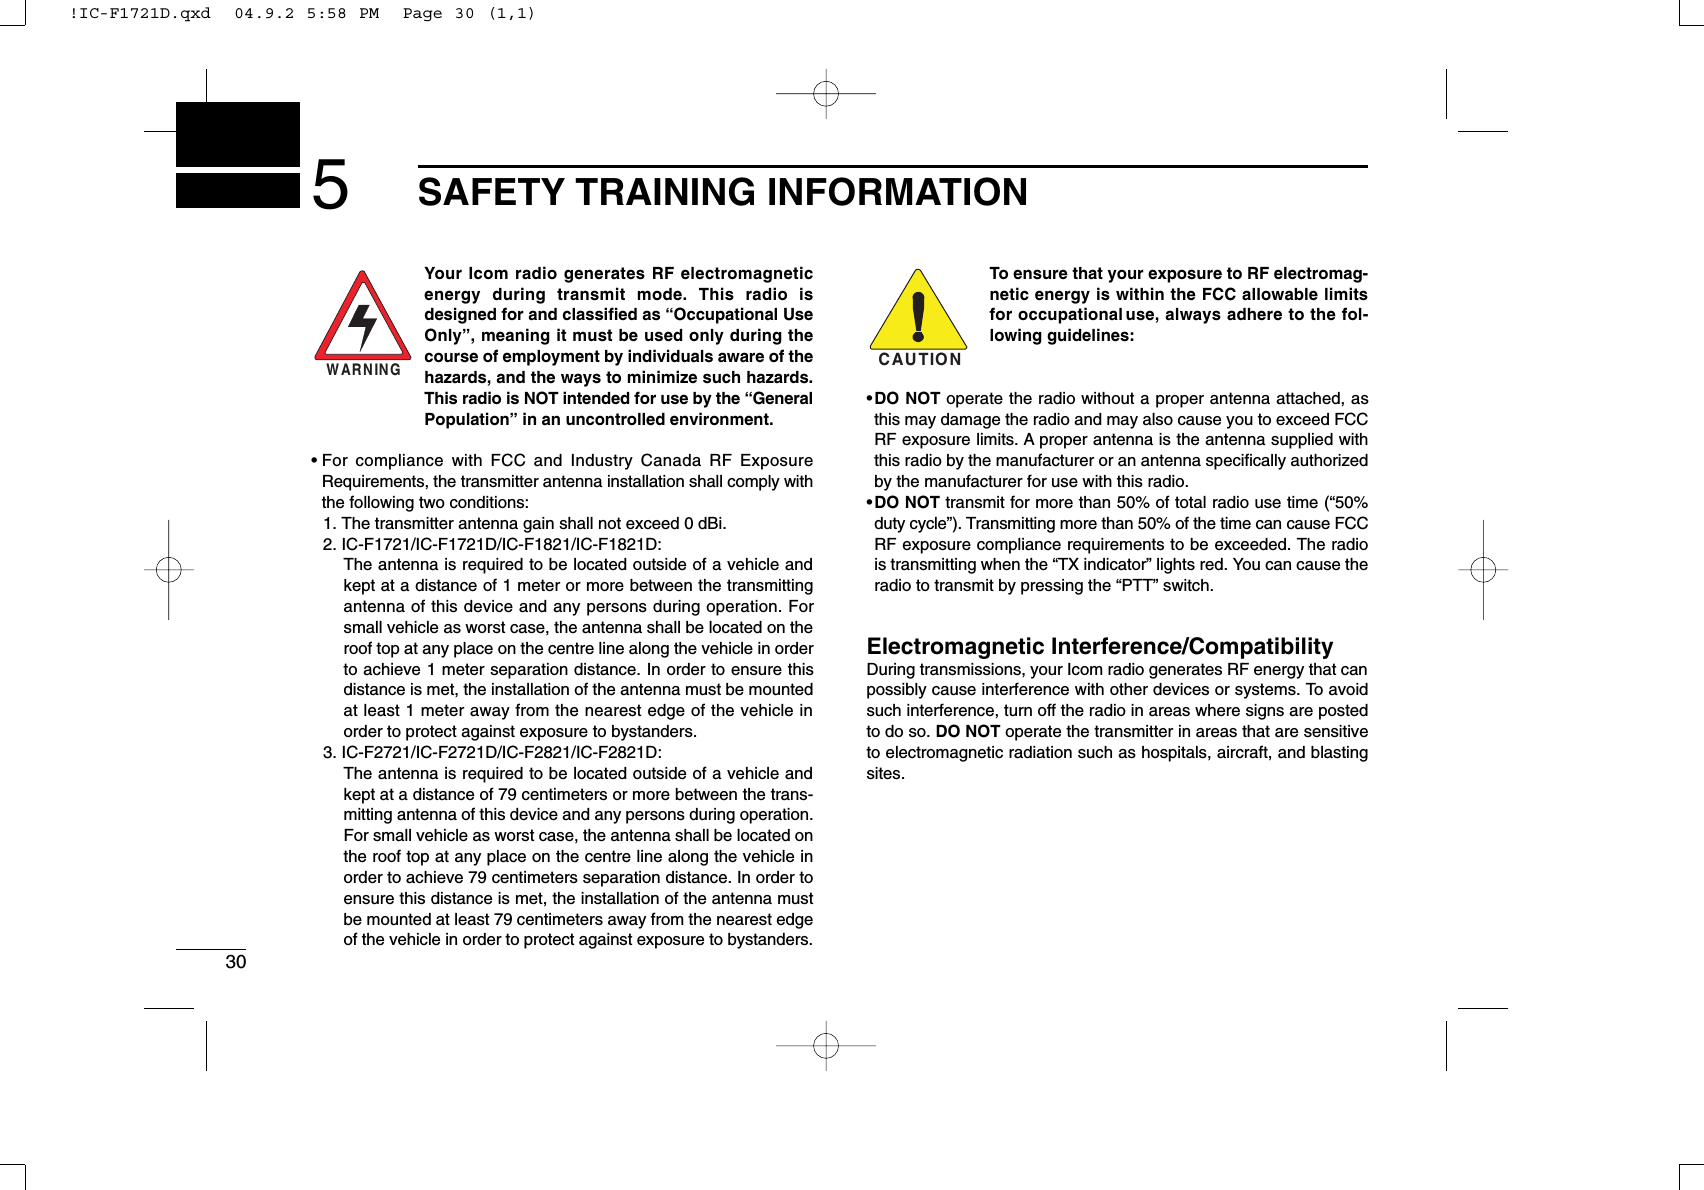 305SAFETY TRAINING INFORMATIONYour Icom radio generates RF electromagneticenergy during transmit mode. This radio isdesigned for and classiﬁed as “Occupational UseOnly”, meaning it must be used only during thecourse of employment by individuals aware of thehazards, and the ways to minimize such hazards.This radio is NOT intended for use by the “GeneralPopulation” in an uncontrolled environment.• For compliance with FCC and Industry Canada RF ExposureRequirements, the transmitter antenna installation shall comply withthe following two conditions:1. The transmitter antenna gain shall not exceed 0 dBi.2. IC-F1721/IC-F1721D/IC-F1821/IC-F1821D:The antenna is required to be located outside of a vehicle andkept at a distance of 1 meter or more between the transmittingantenna of this device and any persons during operation. Forsmall vehicle as worst case, the antenna shall be located on theroof top at any place on the centre line along the vehicle in orderto achieve 1 meter separation distance. In order to ensure thisdistance is met, the installation of the antenna must be mountedat least 1 meter away from the nearest edge of the vehicle inorder to protect against exposure to bystanders.3. IC-F2721/IC-F2721D/IC-F2821/IC-F2821D:The antenna is required to be located outside of a vehicle andkept at a distance of 79 centimeters or more between the trans-mitting antenna of this device and any persons during operation.For small vehicle as worst case, the antenna shall be located onthe roof top at any place on the centre line along the vehicle inorder to achieve 79 centimeters separation distance. In order toensure this distance is met, the installation of the antenna mustbe mounted at least 79 centimeters away from the nearest edgeof the vehicle in order to protect against exposure to bystanders.To ensure that your exposure to RF electromag-netic energy is within the FCC allowable limitsfor occupational use, always adhere to the fol-lowing guidelines:•DO NOT operate the radio without a proper antenna attached, asthis may damage the radio and may also cause you to exceed FCCRF exposure limits. A proper antenna is the antenna supplied withthis radio by the manufacturer or an antenna speciﬁcally authorizedby the manufacturer for use with this radio.•DO NOT transmit for more than 50% of total radio use time (“50%duty cycle”). Transmitting more than 50% of the time can cause FCCRF exposure compliance requirements to be exceeded. The radiois transmitting when the “TX indicator” lights red. You can cause theradio to transmit by pressing the “PTT” switch.Electromagnetic Interference/CompatibilityDuring transmissions, your Icom radio generates RF energy that canpossibly cause interference with other devices or systems. To avoidsuch interference, turn off the radio in areas where signs are postedto do so. DO NOT operate the transmitter in areas that are sensitiveto electromagnetic radiation such as hospitals, aircraft, and blastingsites.WARNINGCAUTION!IC-F1721D.qxd  04.9.2 5:58 PM  Page 30 (1,1)